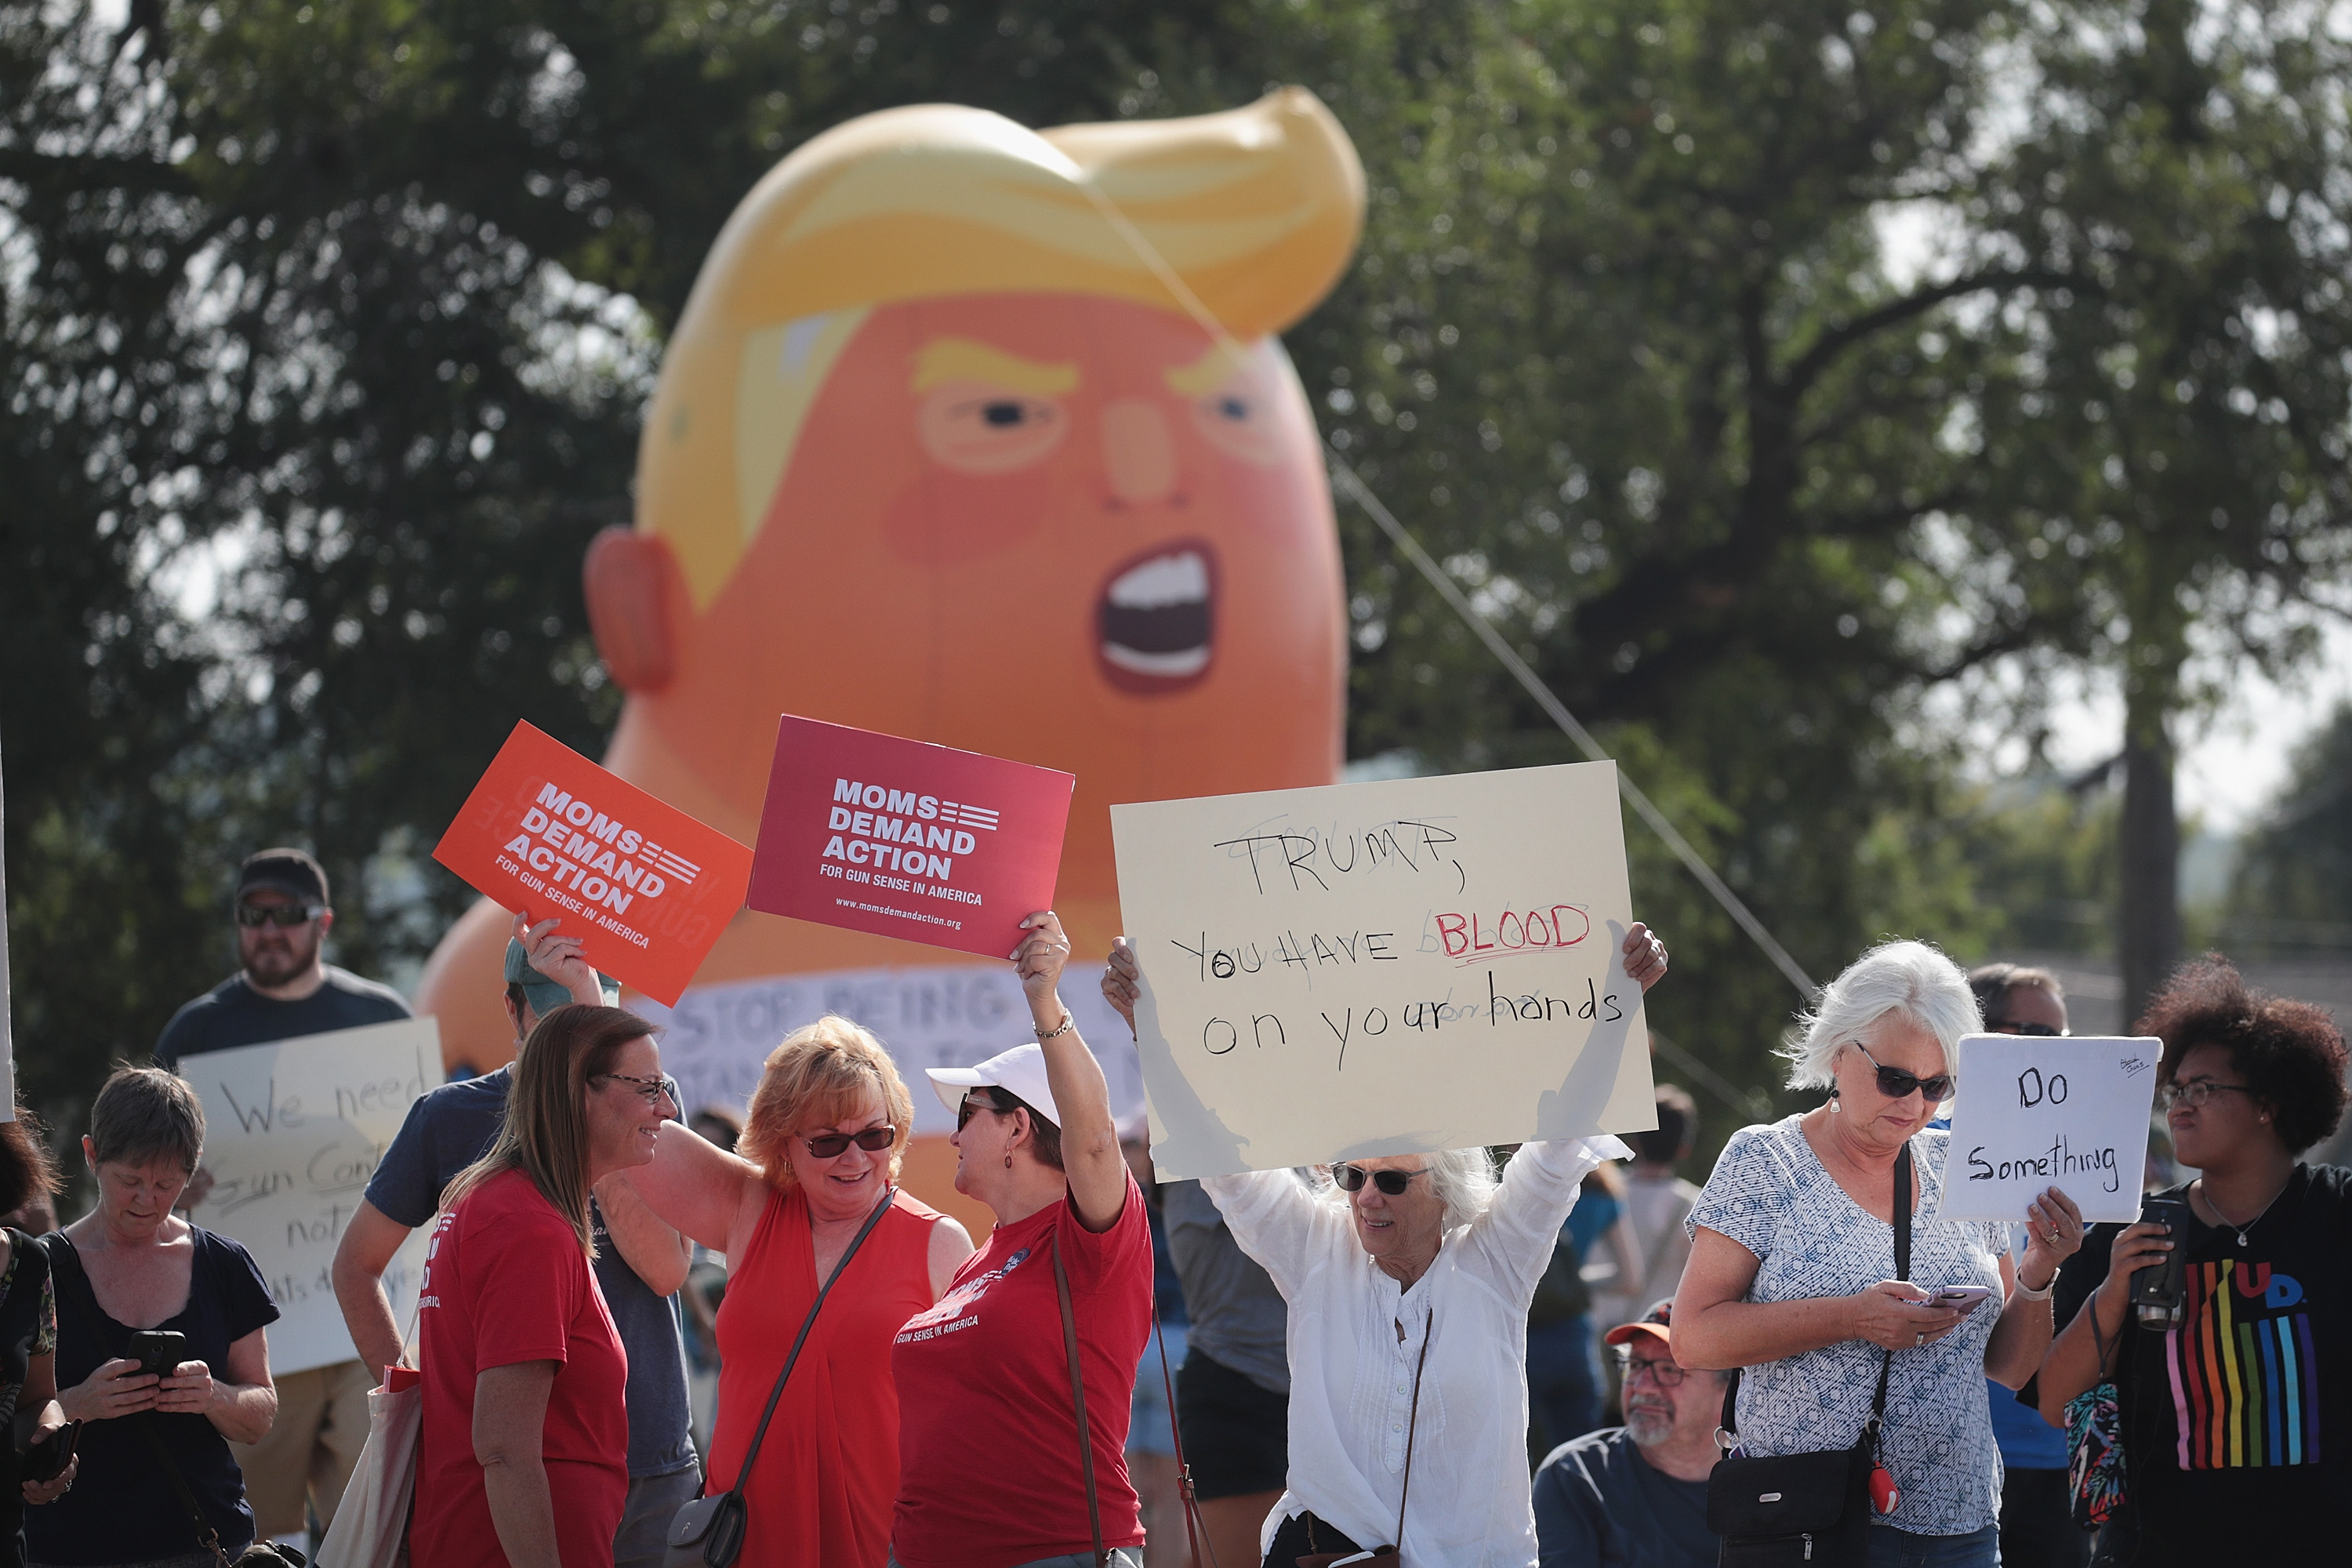 Demonstrators line the street near Miami Valley Hospital in anticipation of a visit from President Donald Trump on August 07, 2019 in Dayton, Ohio. (Scott Olson/Getty Images)